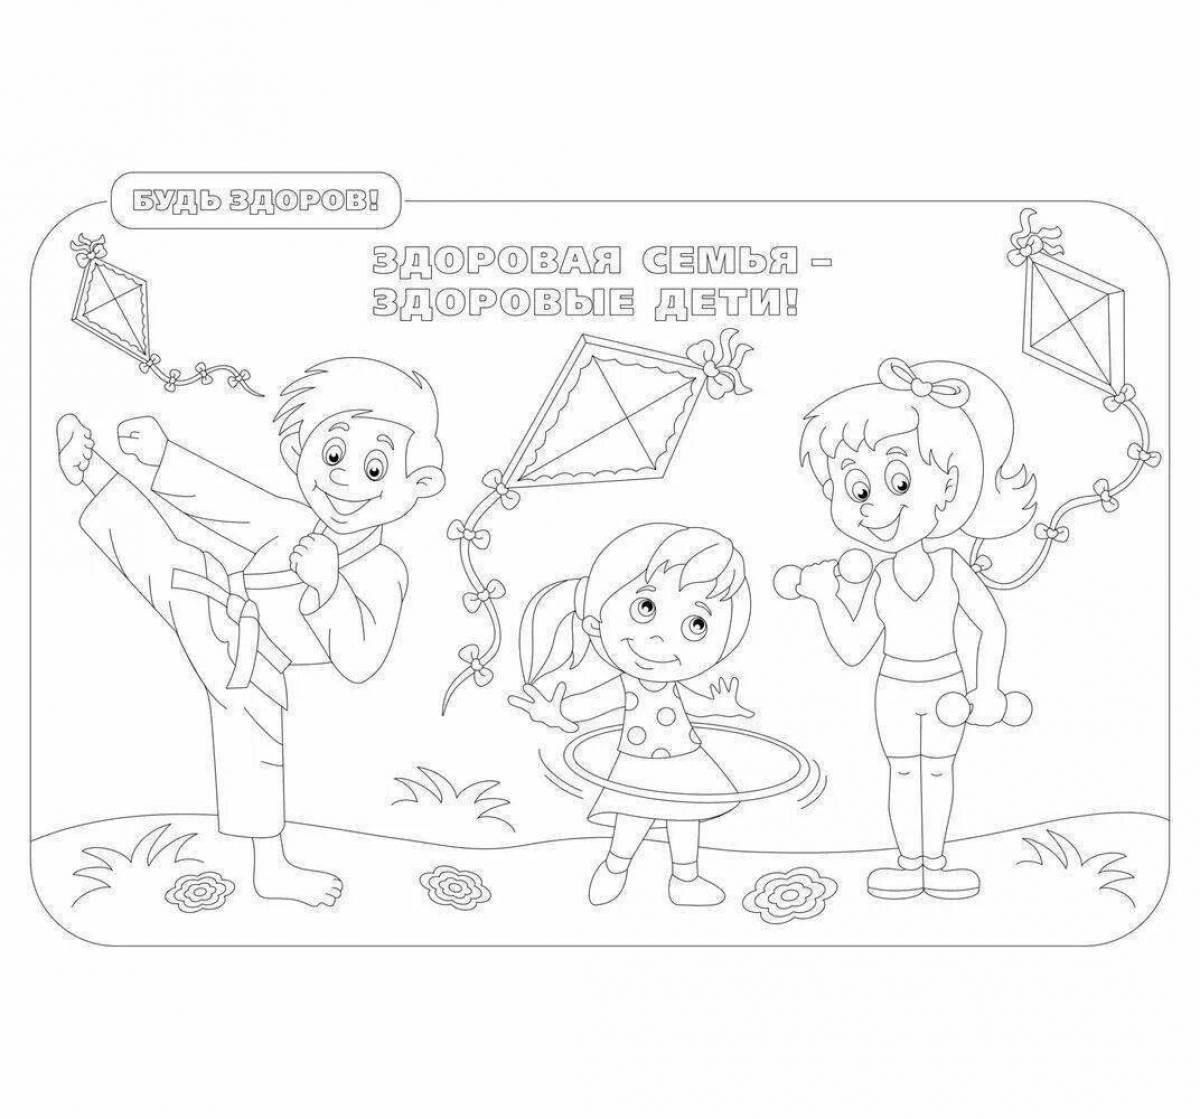 Colorful healthy lifestyle coloring pages for kids